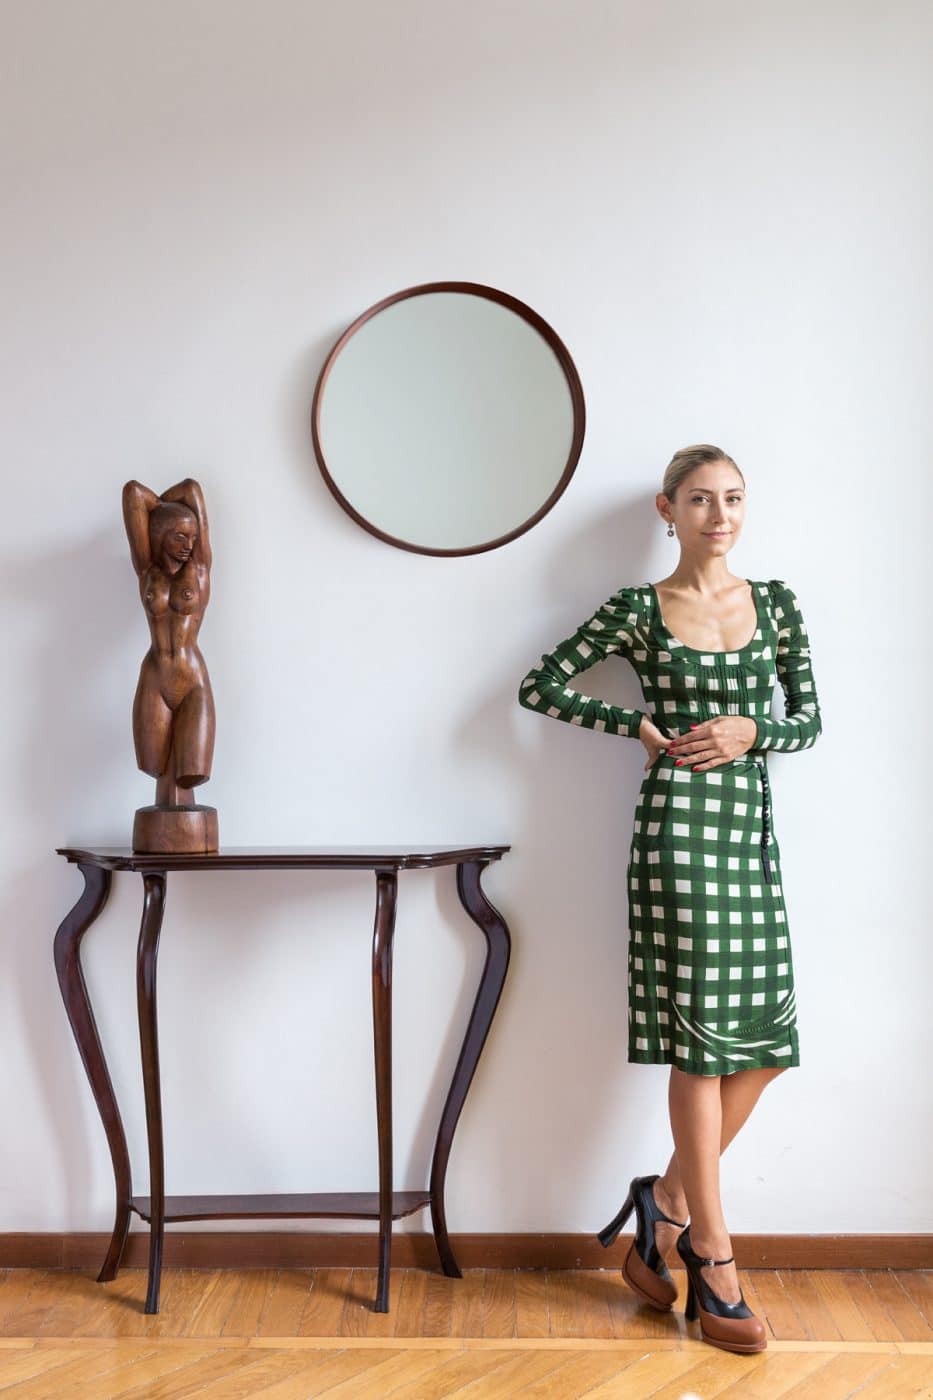 Walton in a green checked Prada dress standing next to a round wood-framed mirror hanging over an Italian mid-century console table topped by a wooden sculpture of a female nude